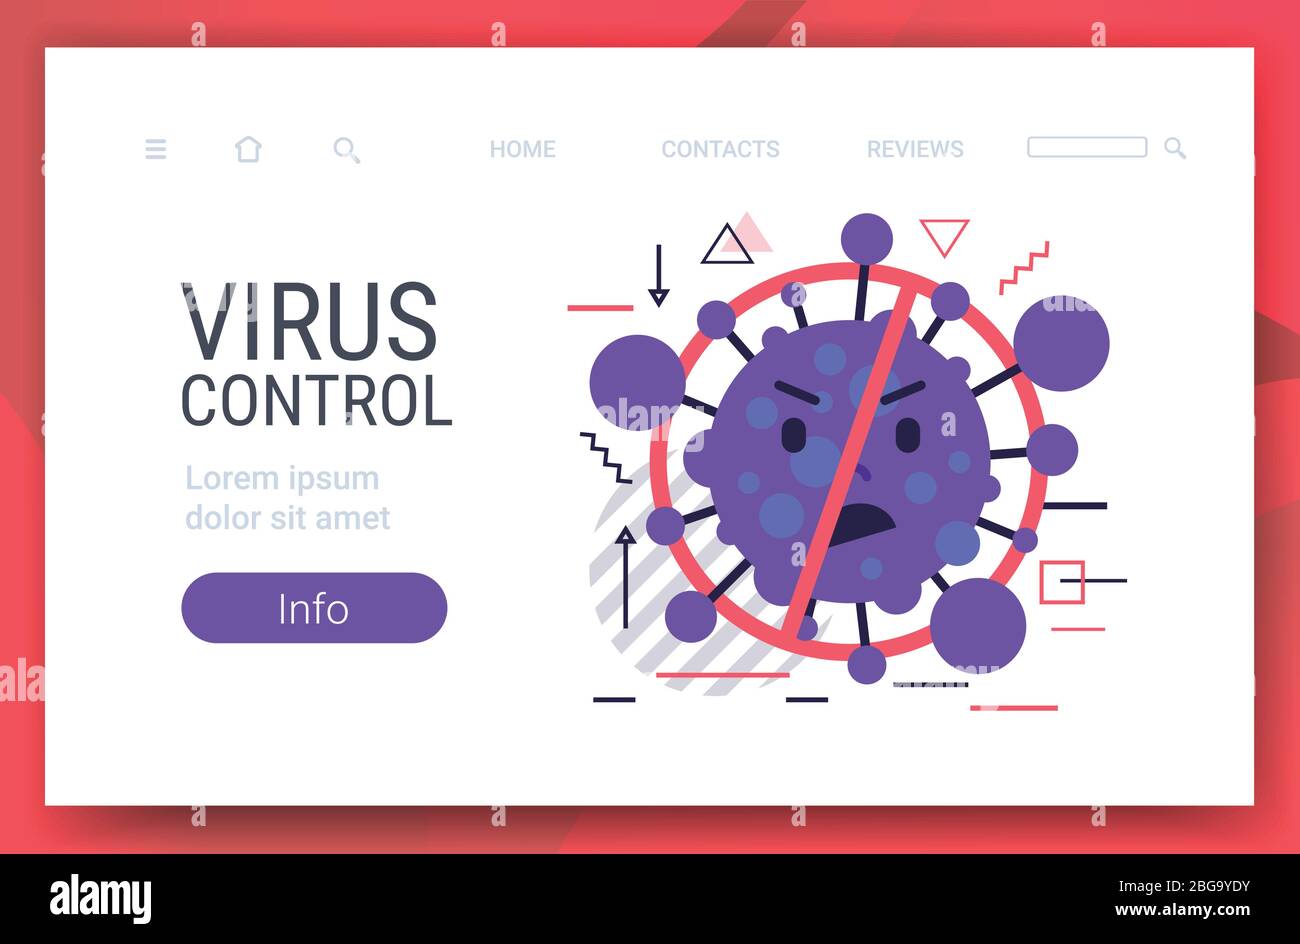 stop coronavirus concept noel 2019-nCoV virus cell with prohibit sign covid-19 prevention poster horizontal copy space vector illustration Stock Vector